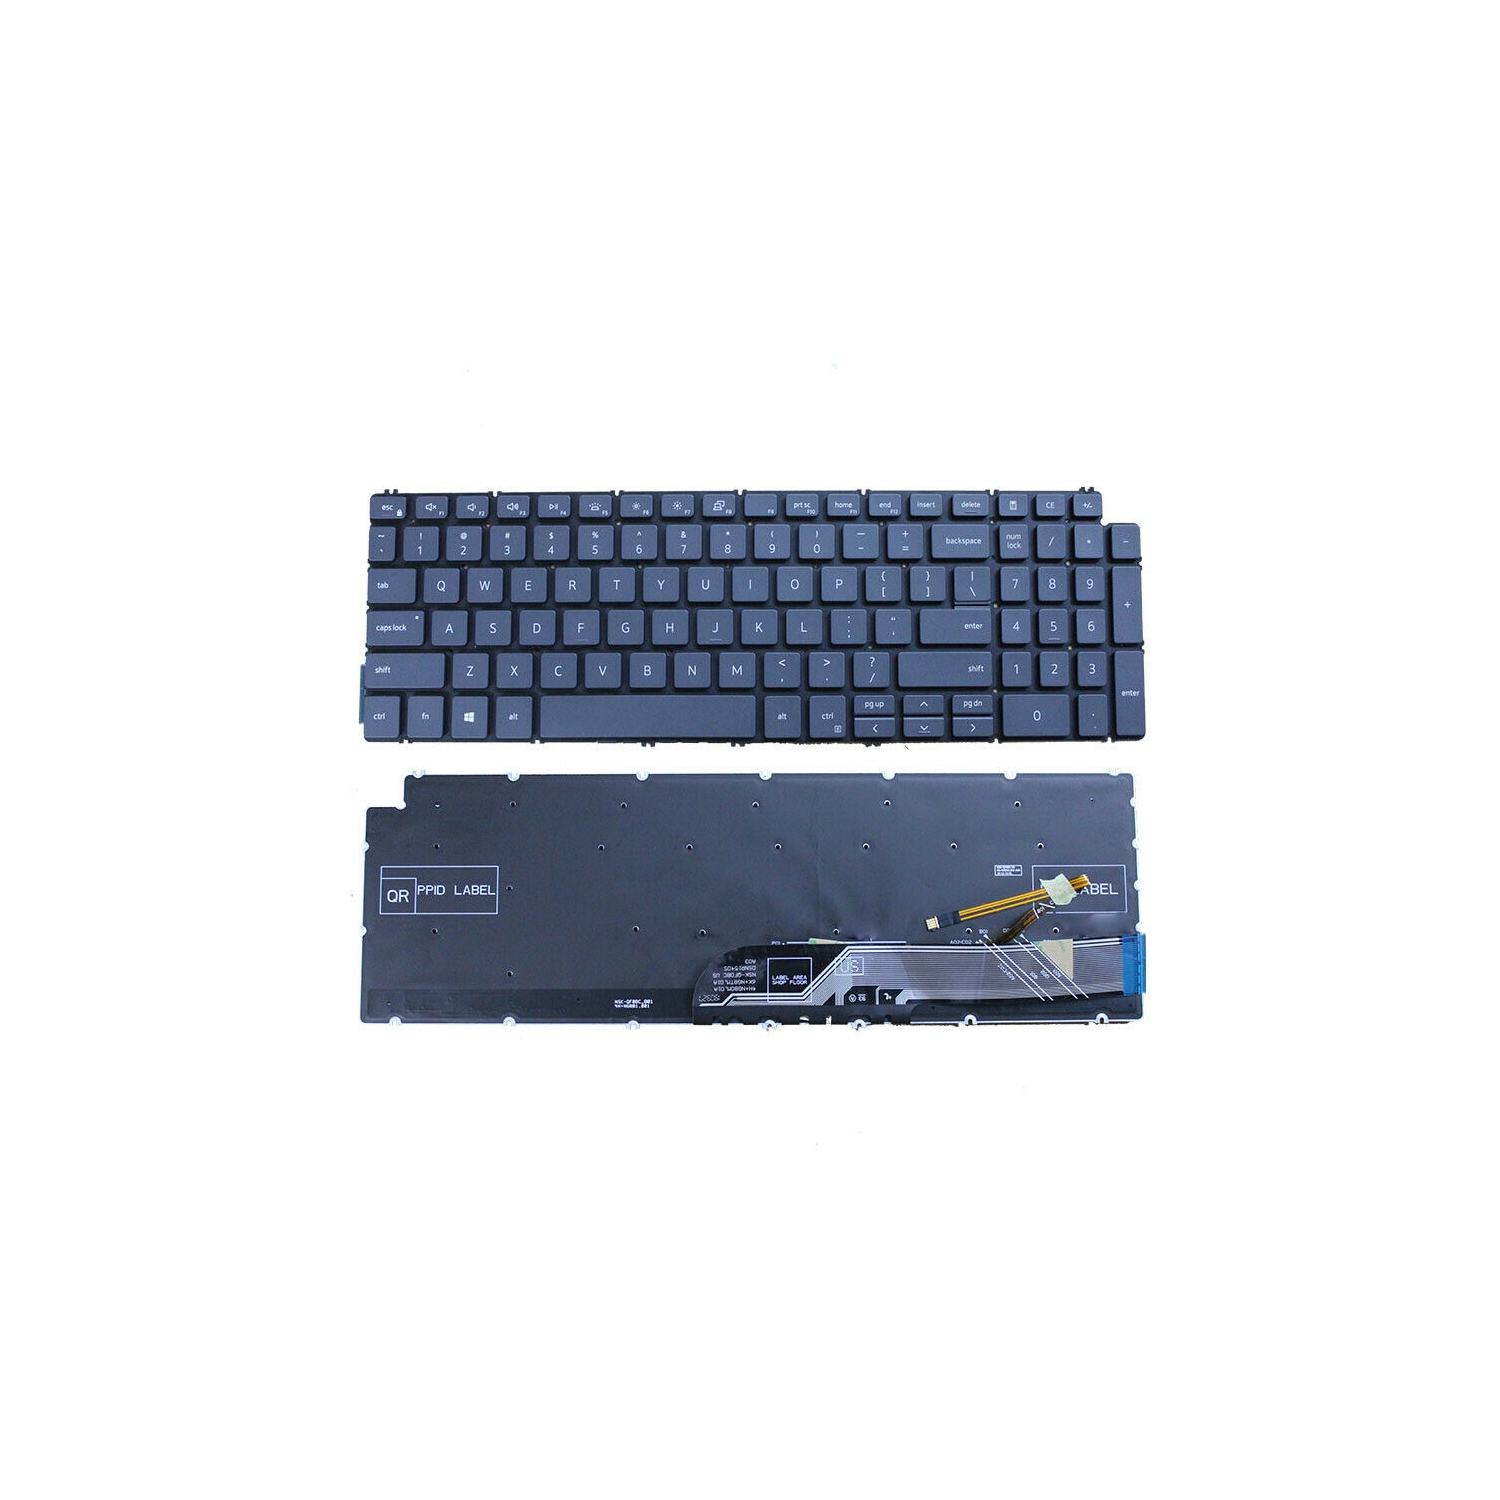 New keyboard for Dell Inspiron 15 5501 5502 5584 5590 5593 5594 5598 15 7000 2-IN-1 7590 7591 17 7000 2-IN-1 7791 17-7791 P42E P88F P90F Keyboard US Backlit Black